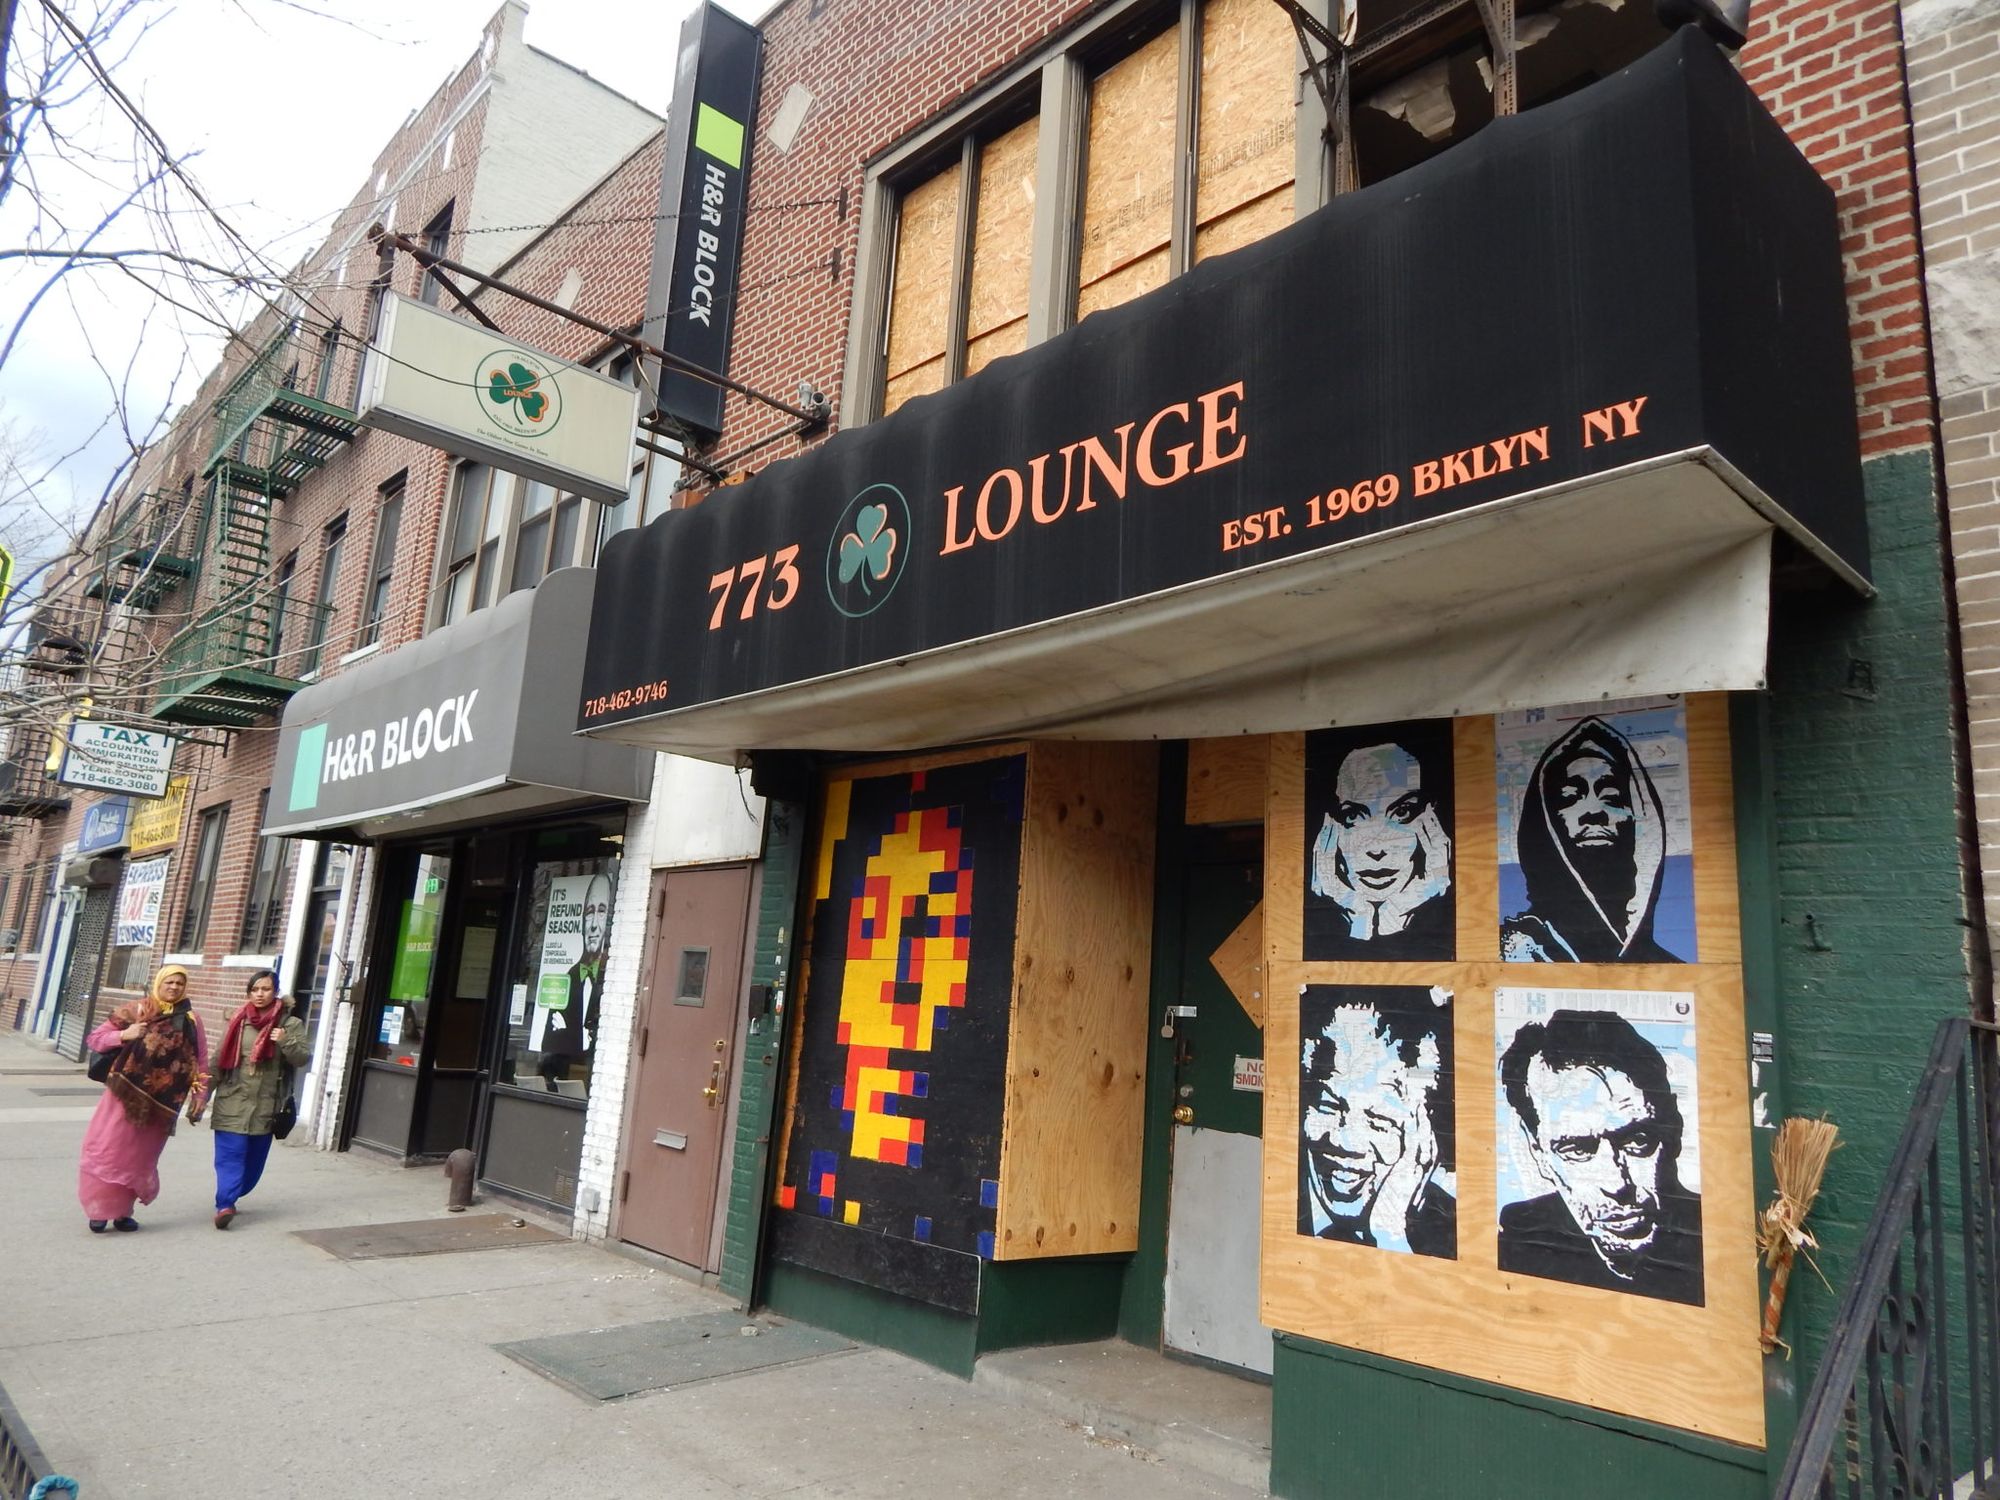 773 Lounge Moves Closer To Reopening